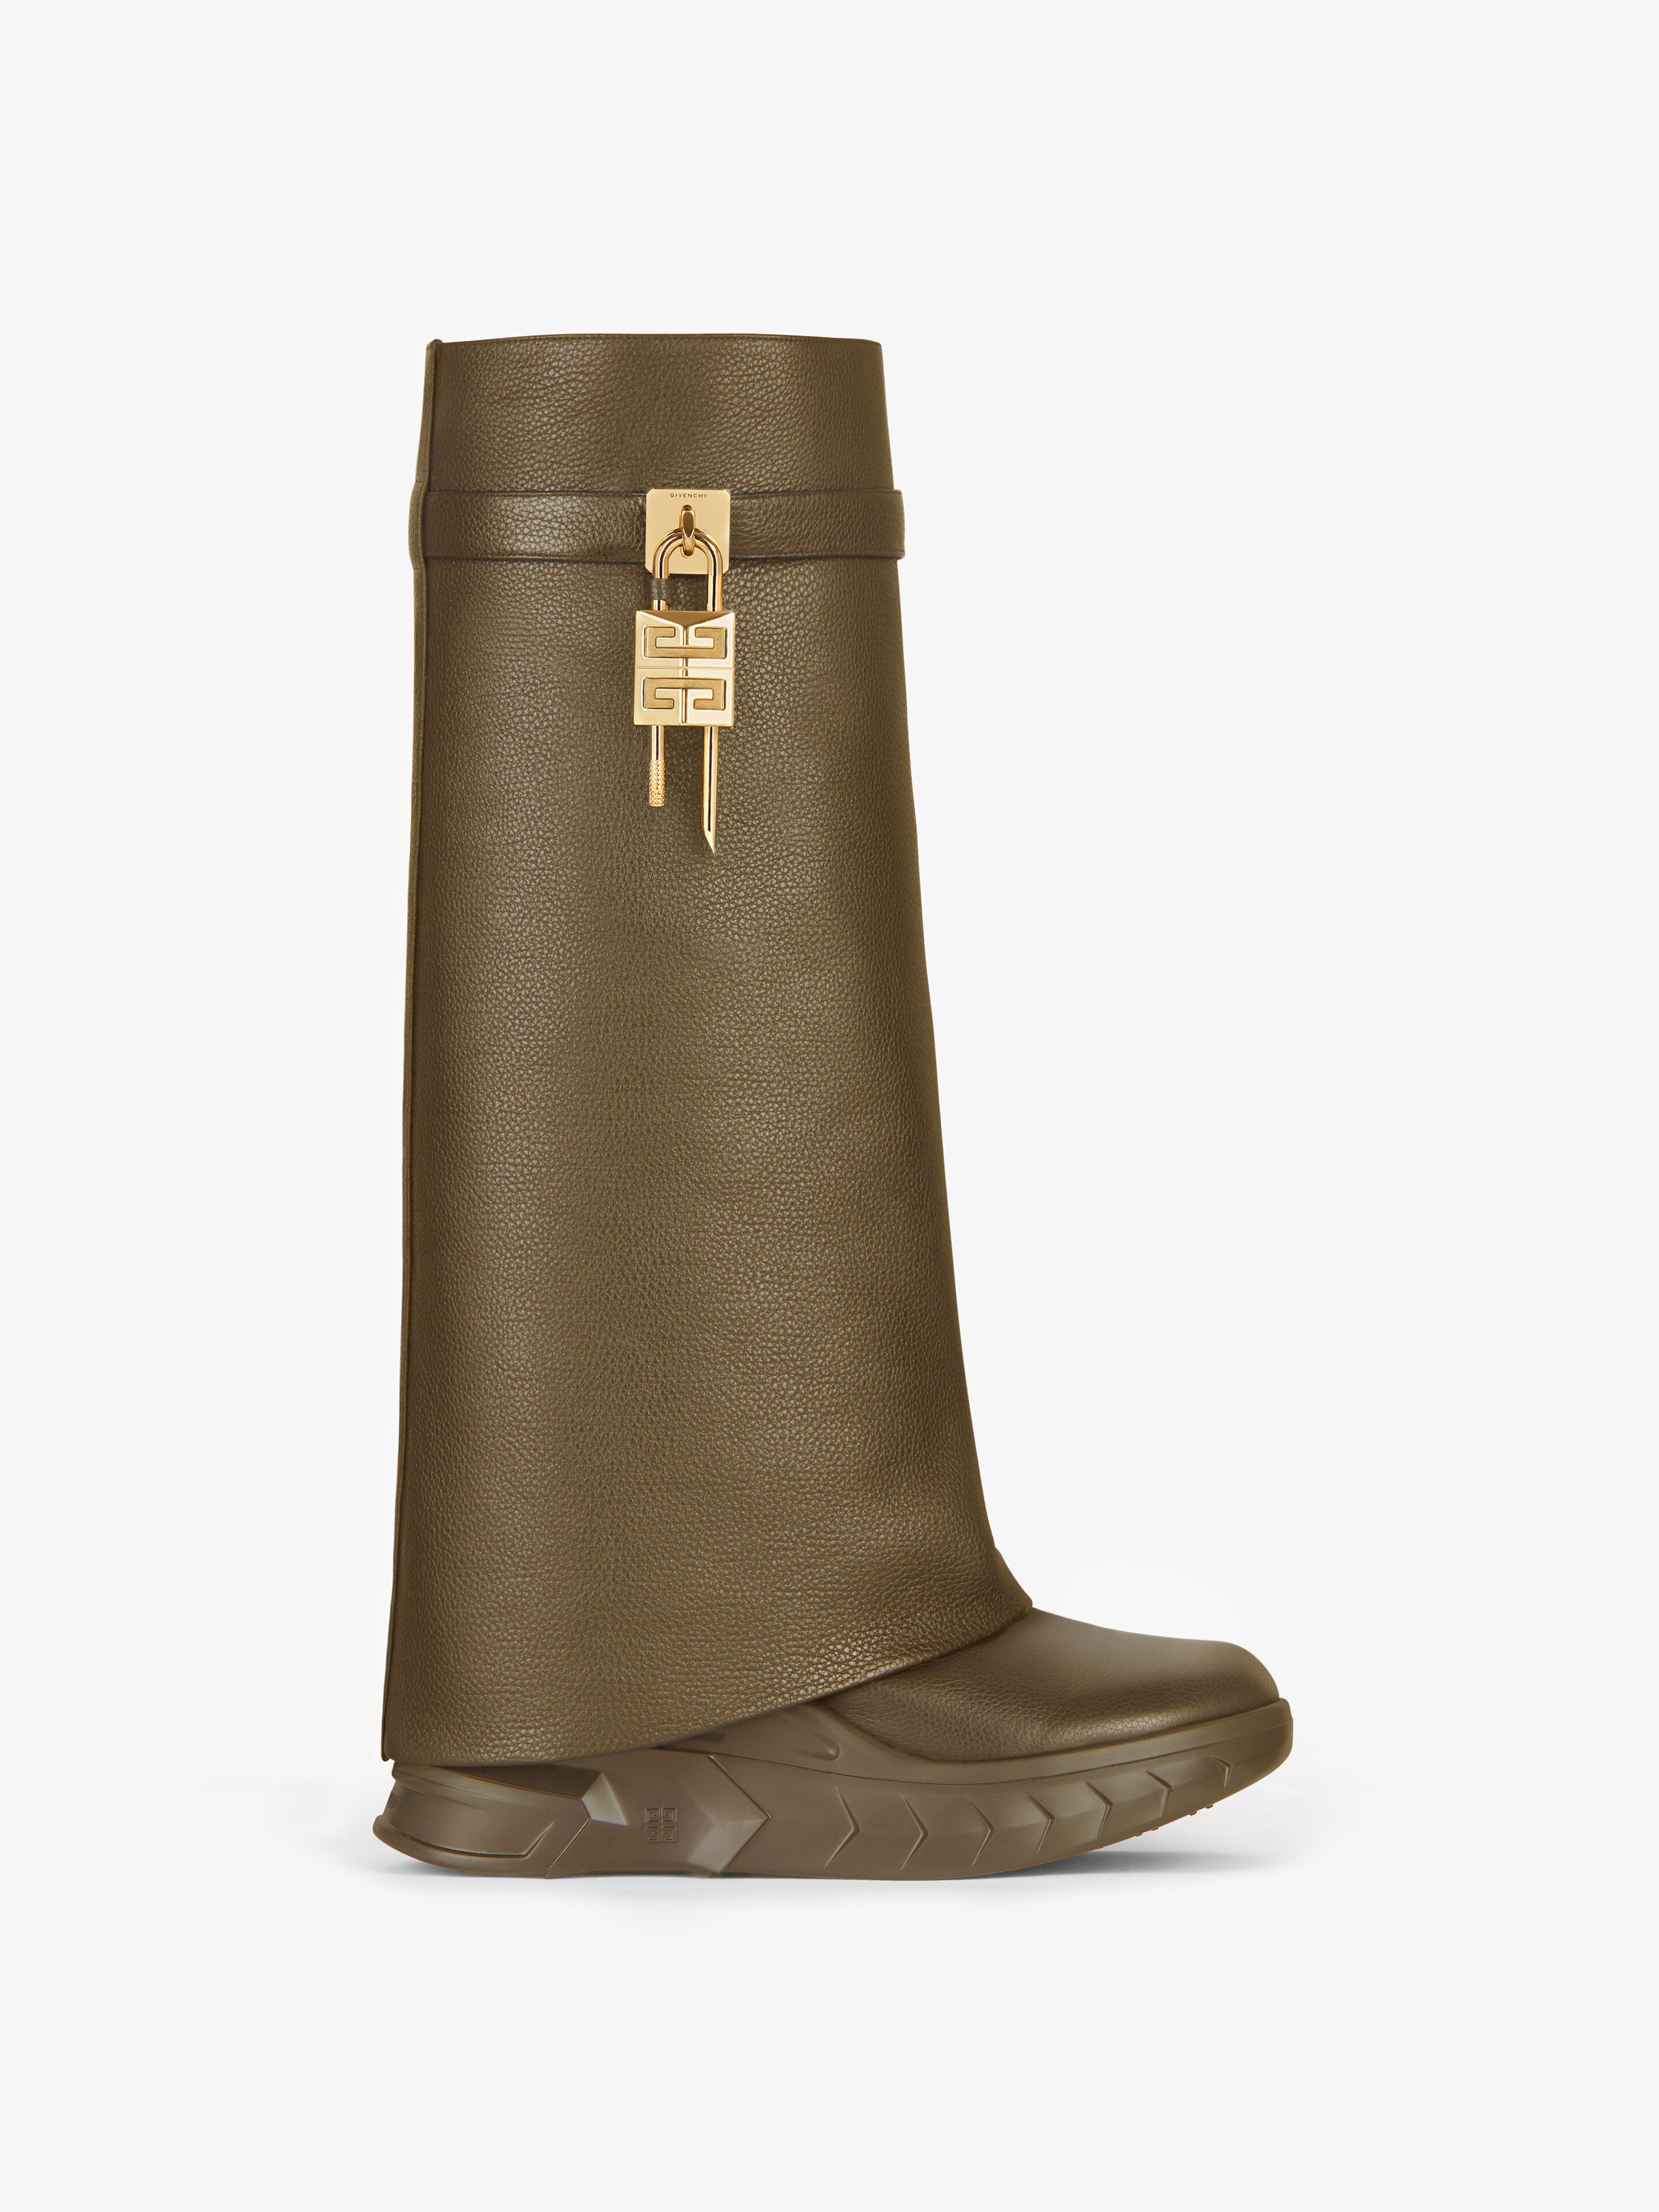 Givenchy Shark Lock Biker Boots In Grained Leather In Dark Khaki